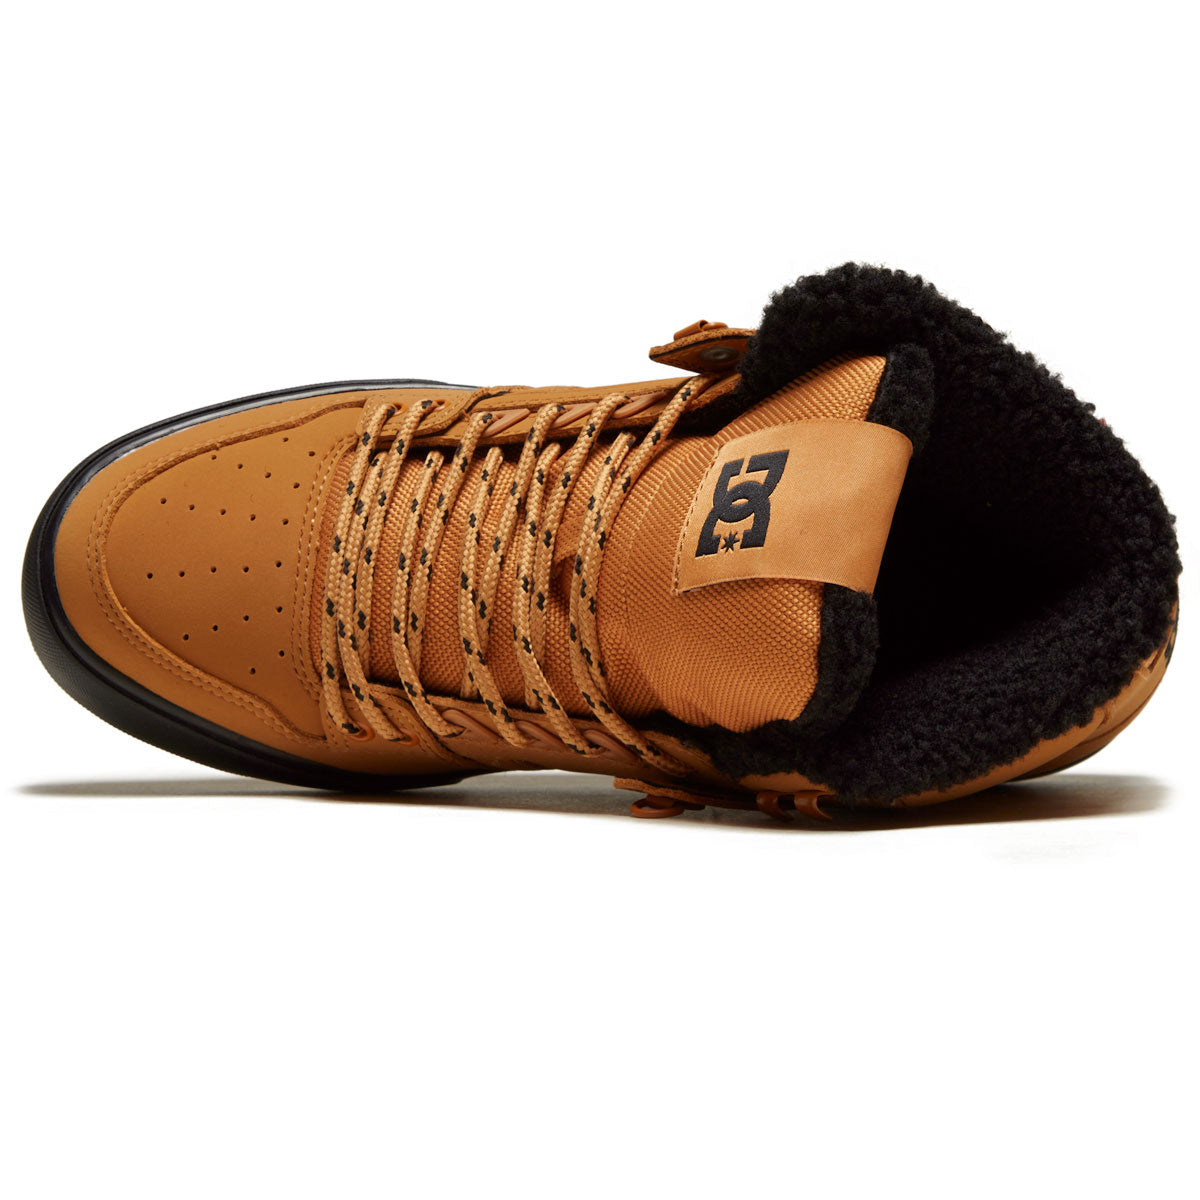 DC Pure High-top Wc Winter Shoes - Wheat/Black image 3